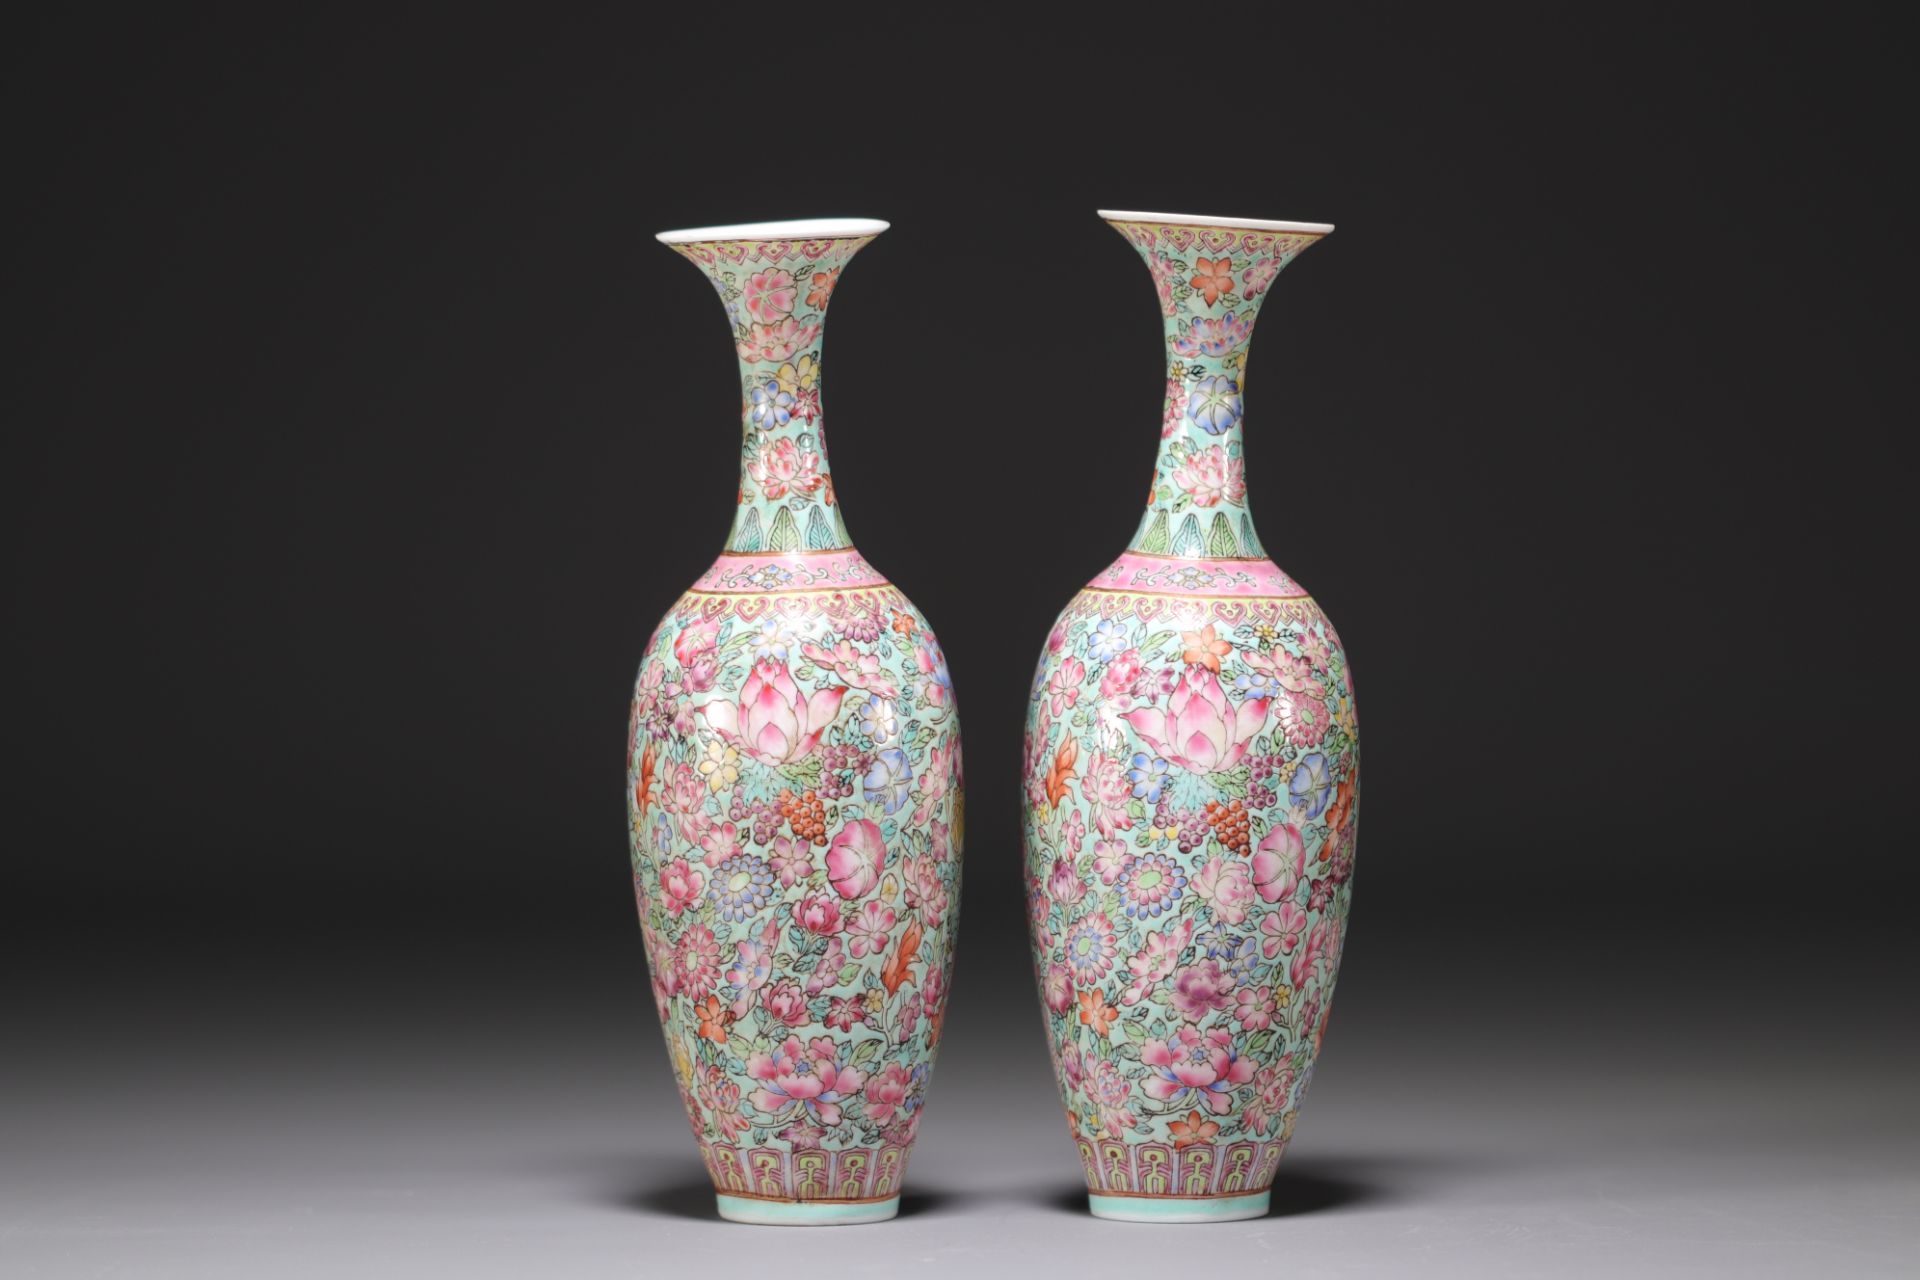 China - A pair of eggshell porcelain vases with floral decoration. - Image 2 of 5